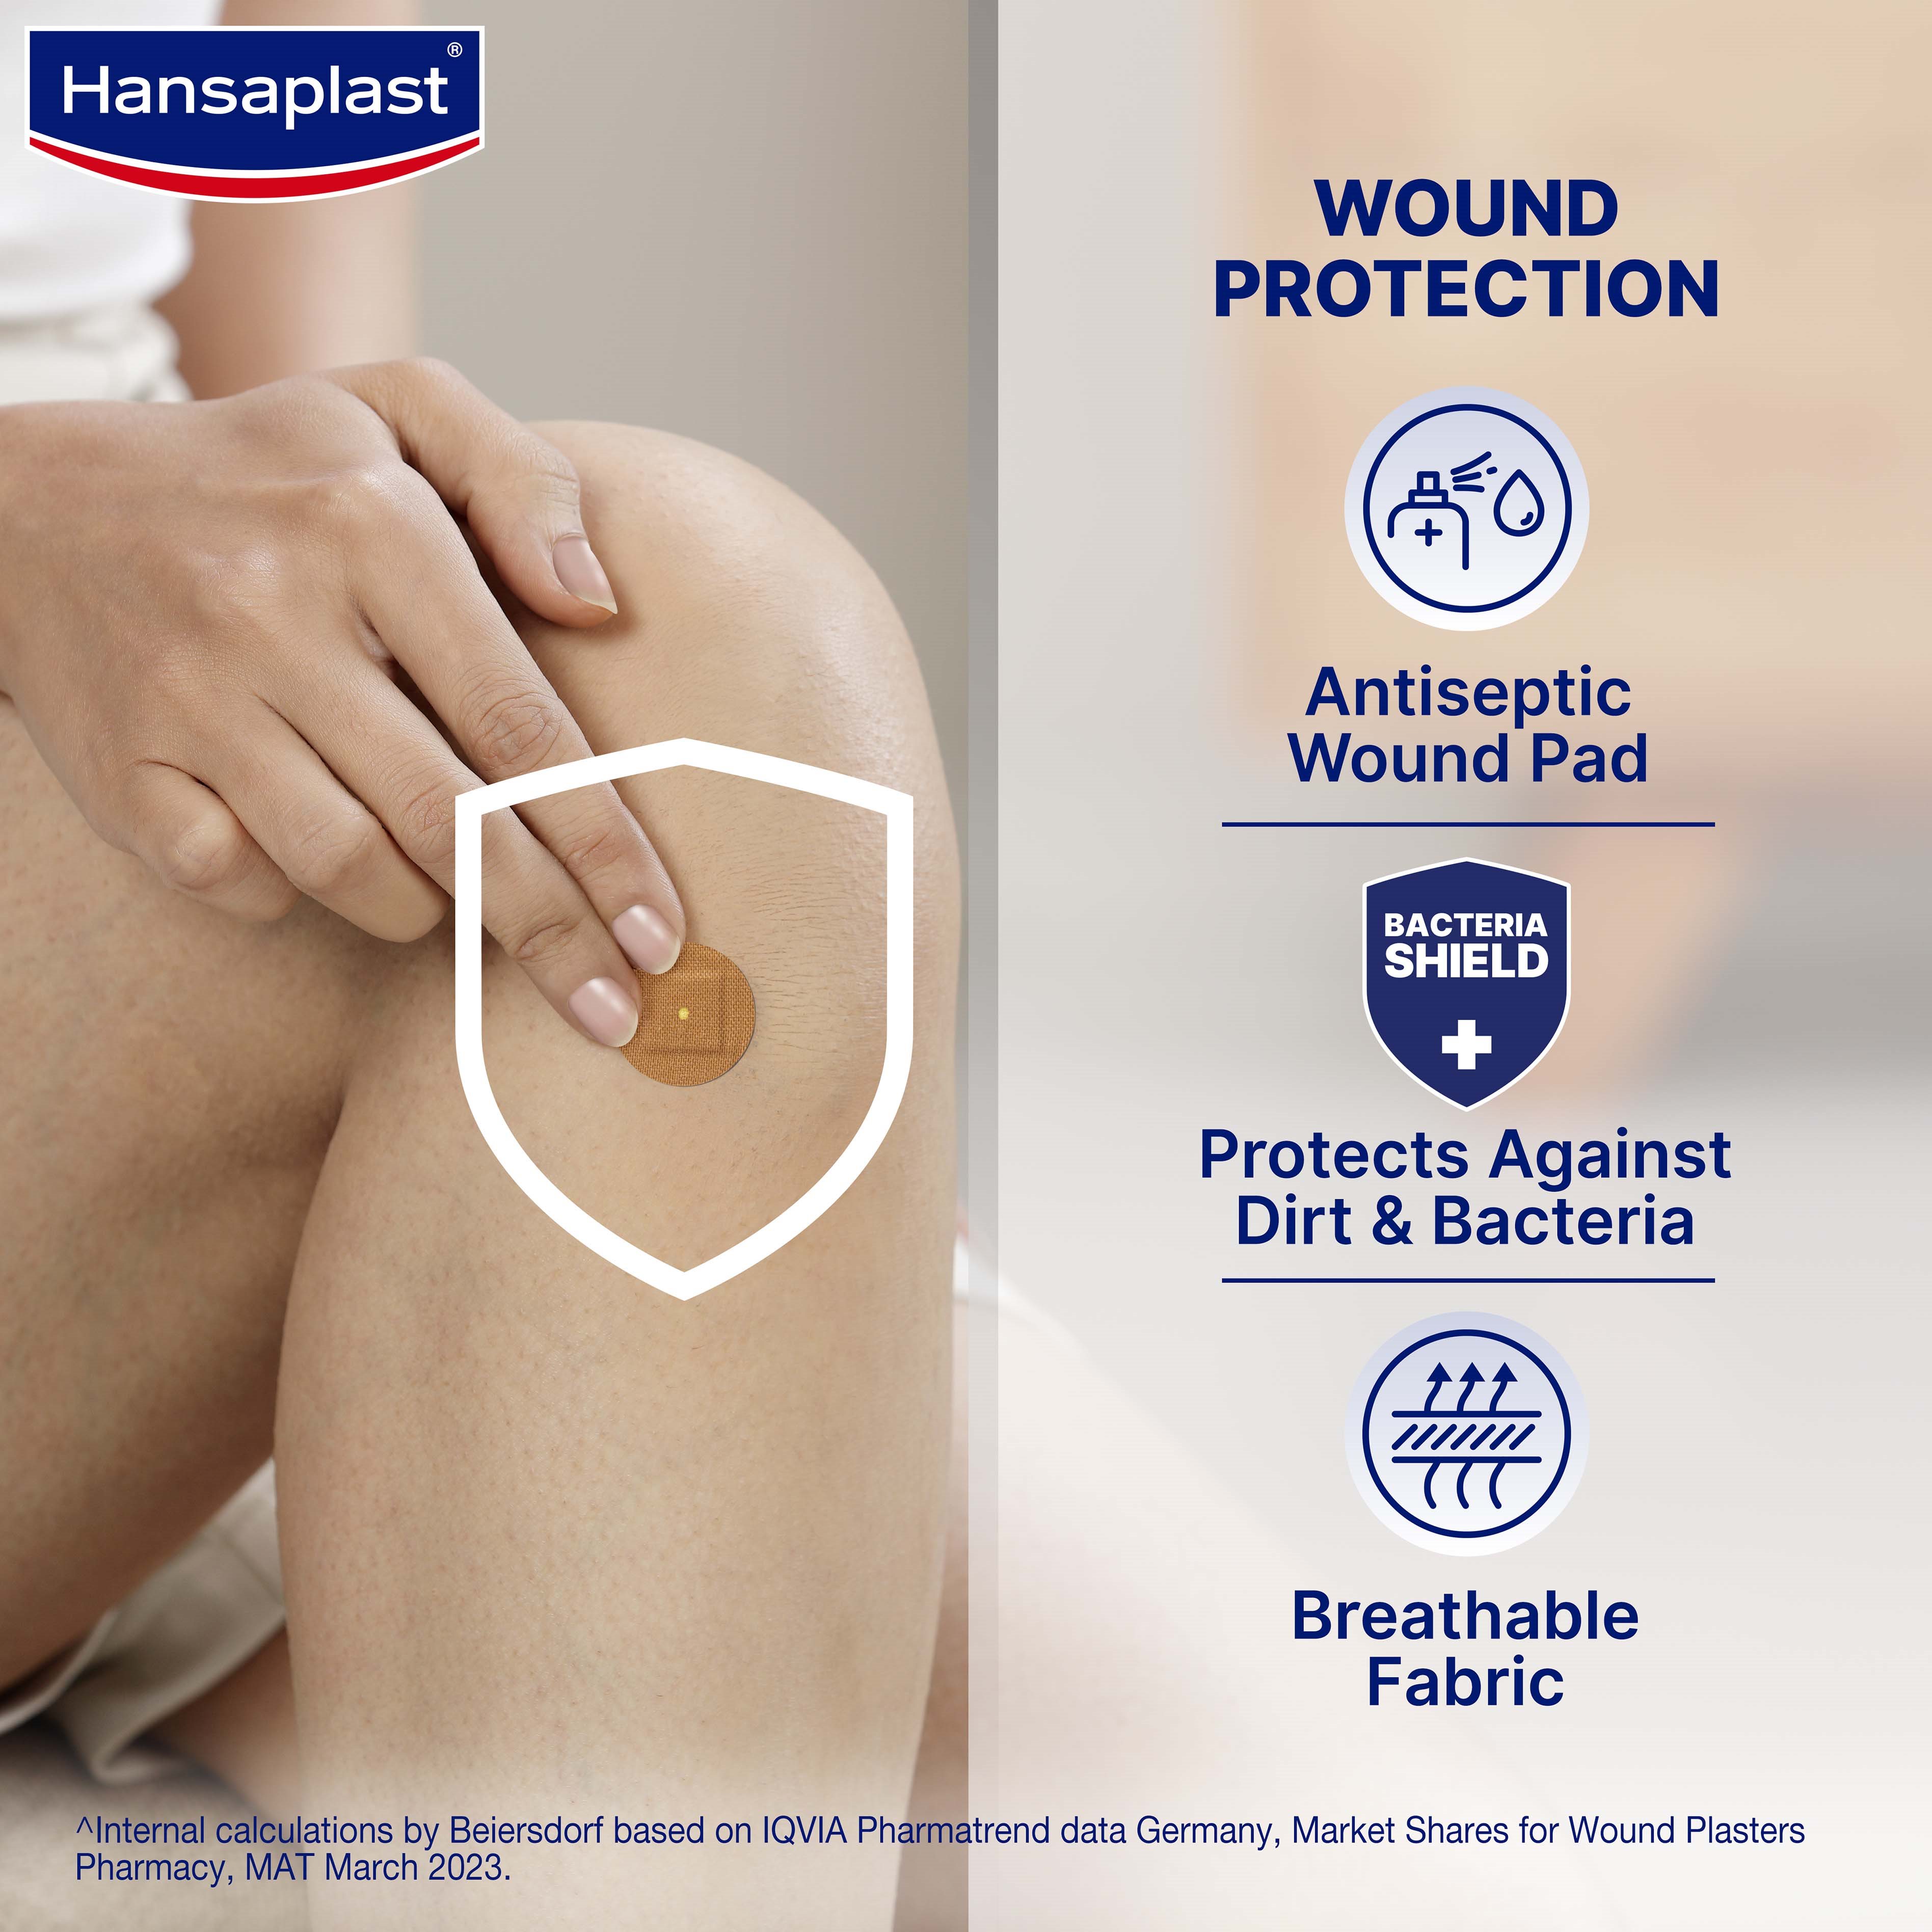 Spot Plaster Small Box | Antiseptic Round Bandage for small cuts and wounds  | Hansaplast